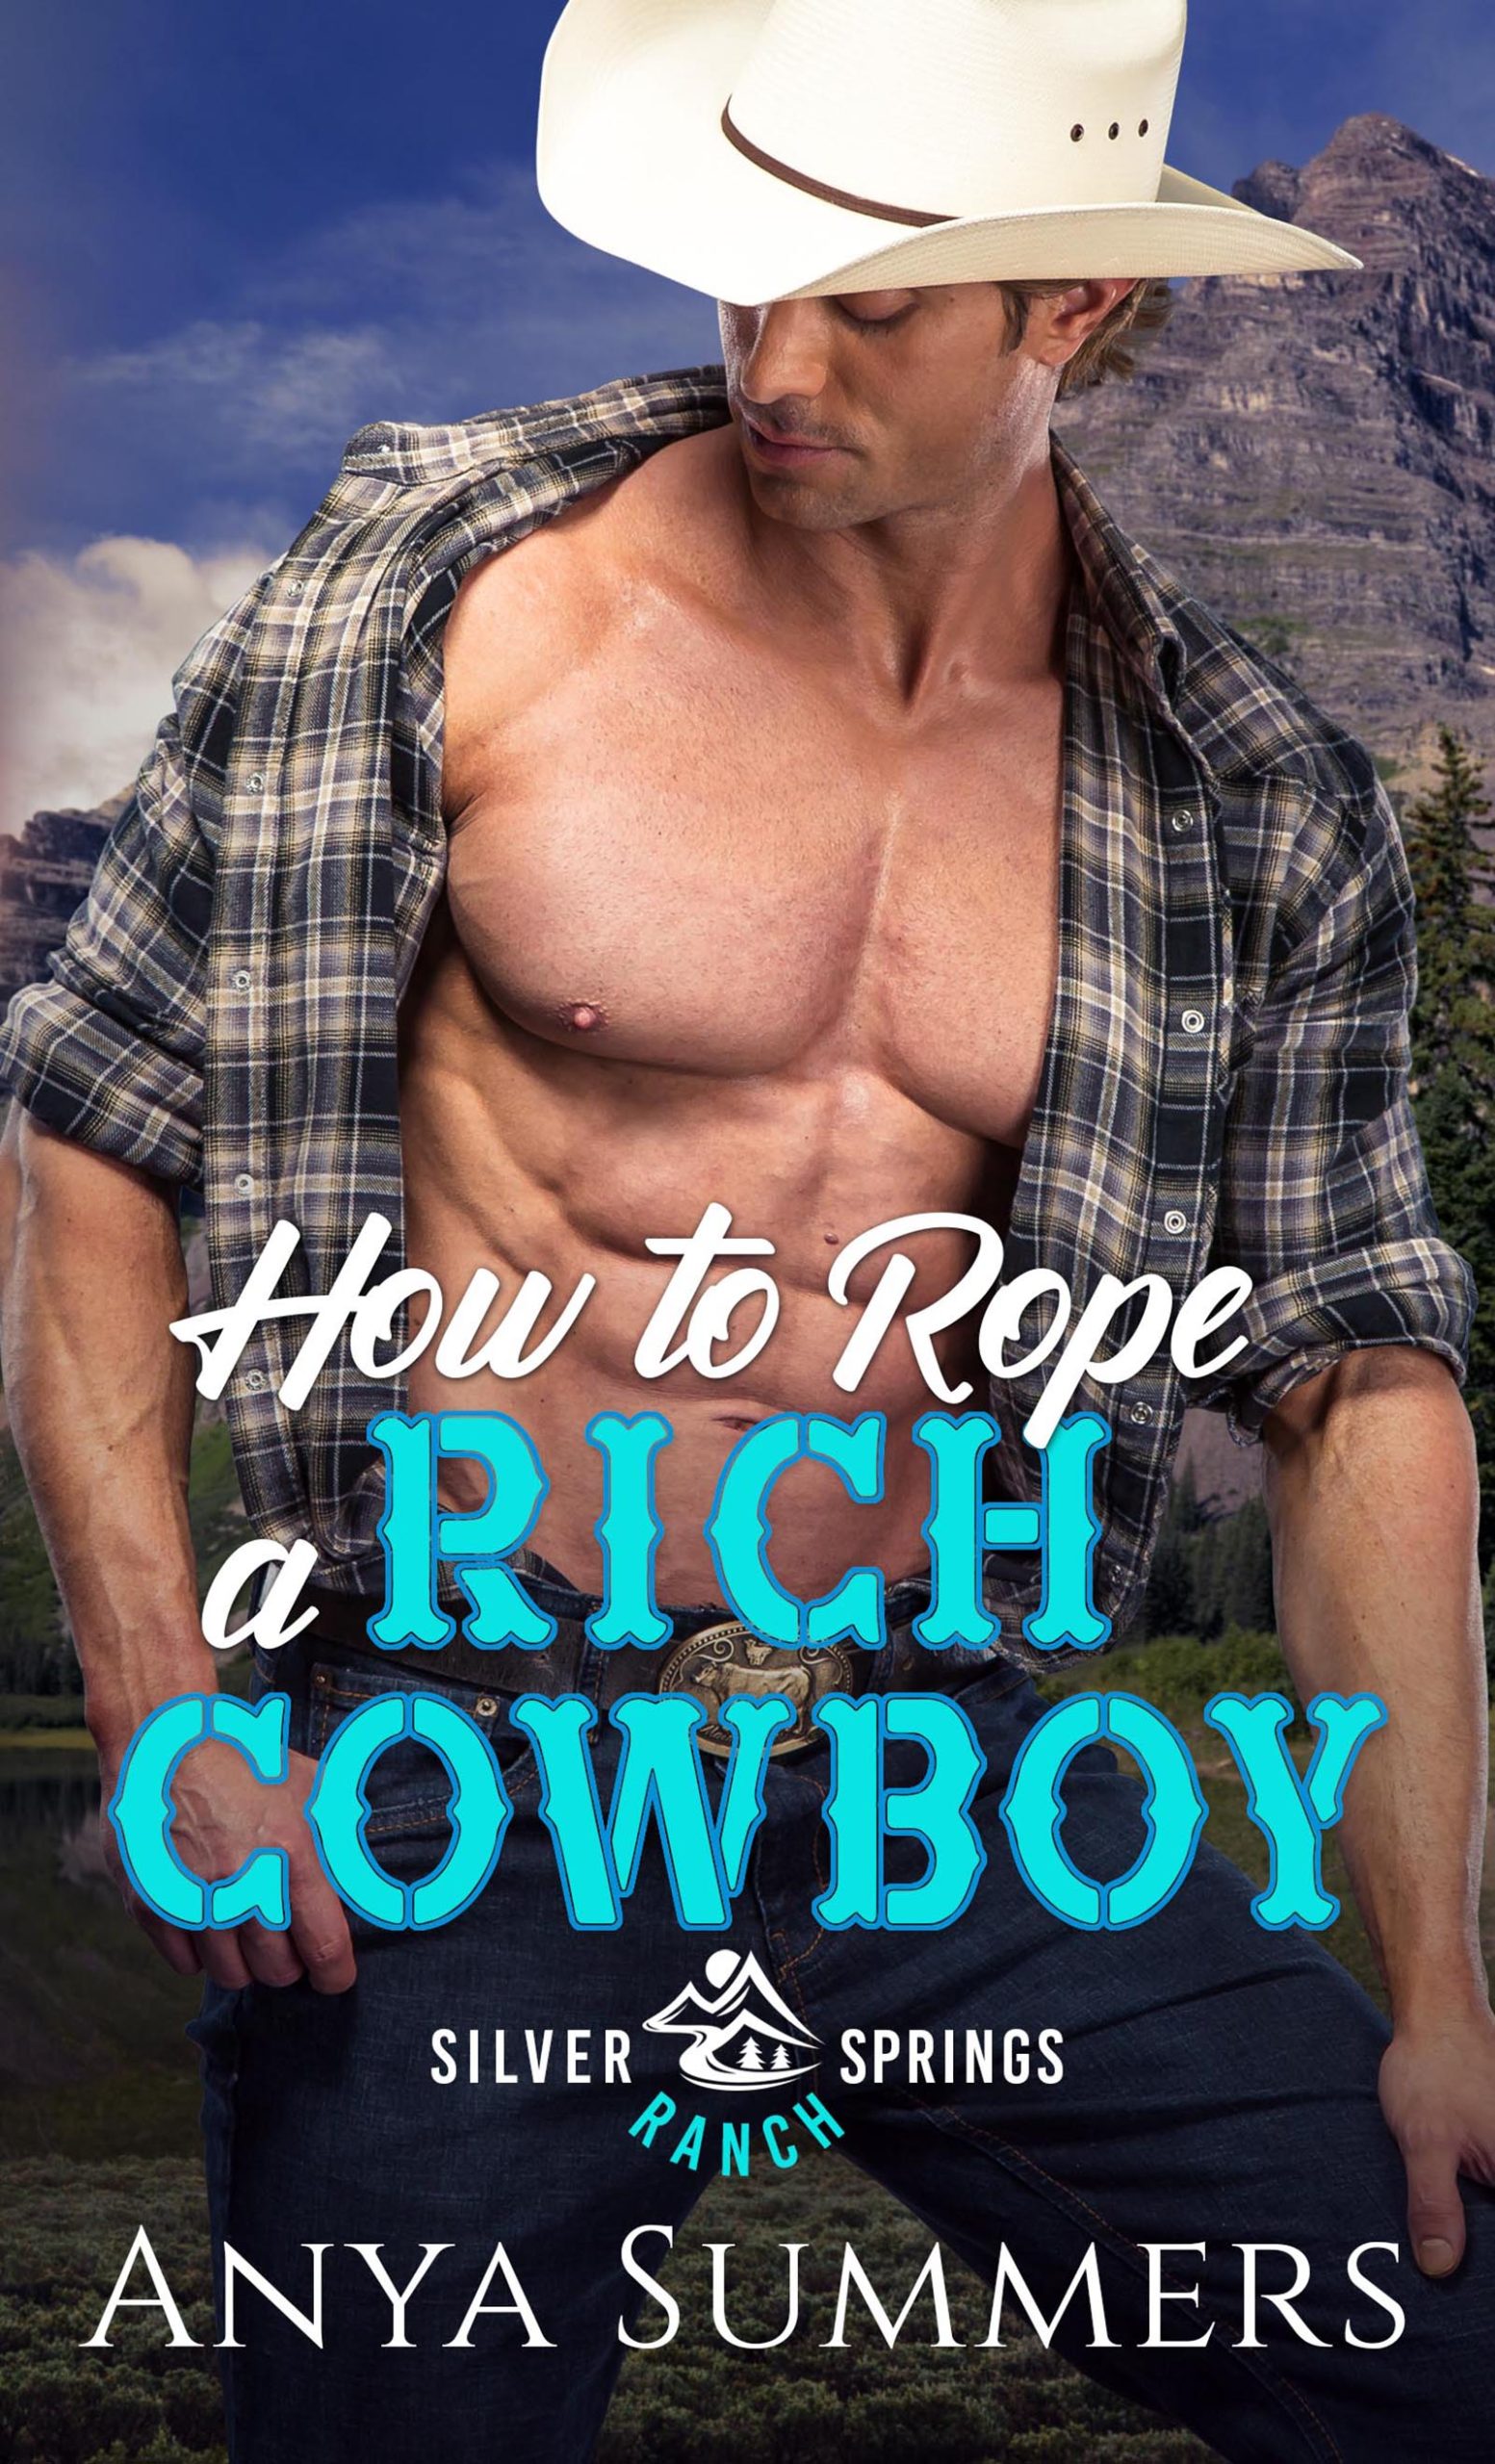 HOW TO ROPE A RICH COWBOY by Anya Summers